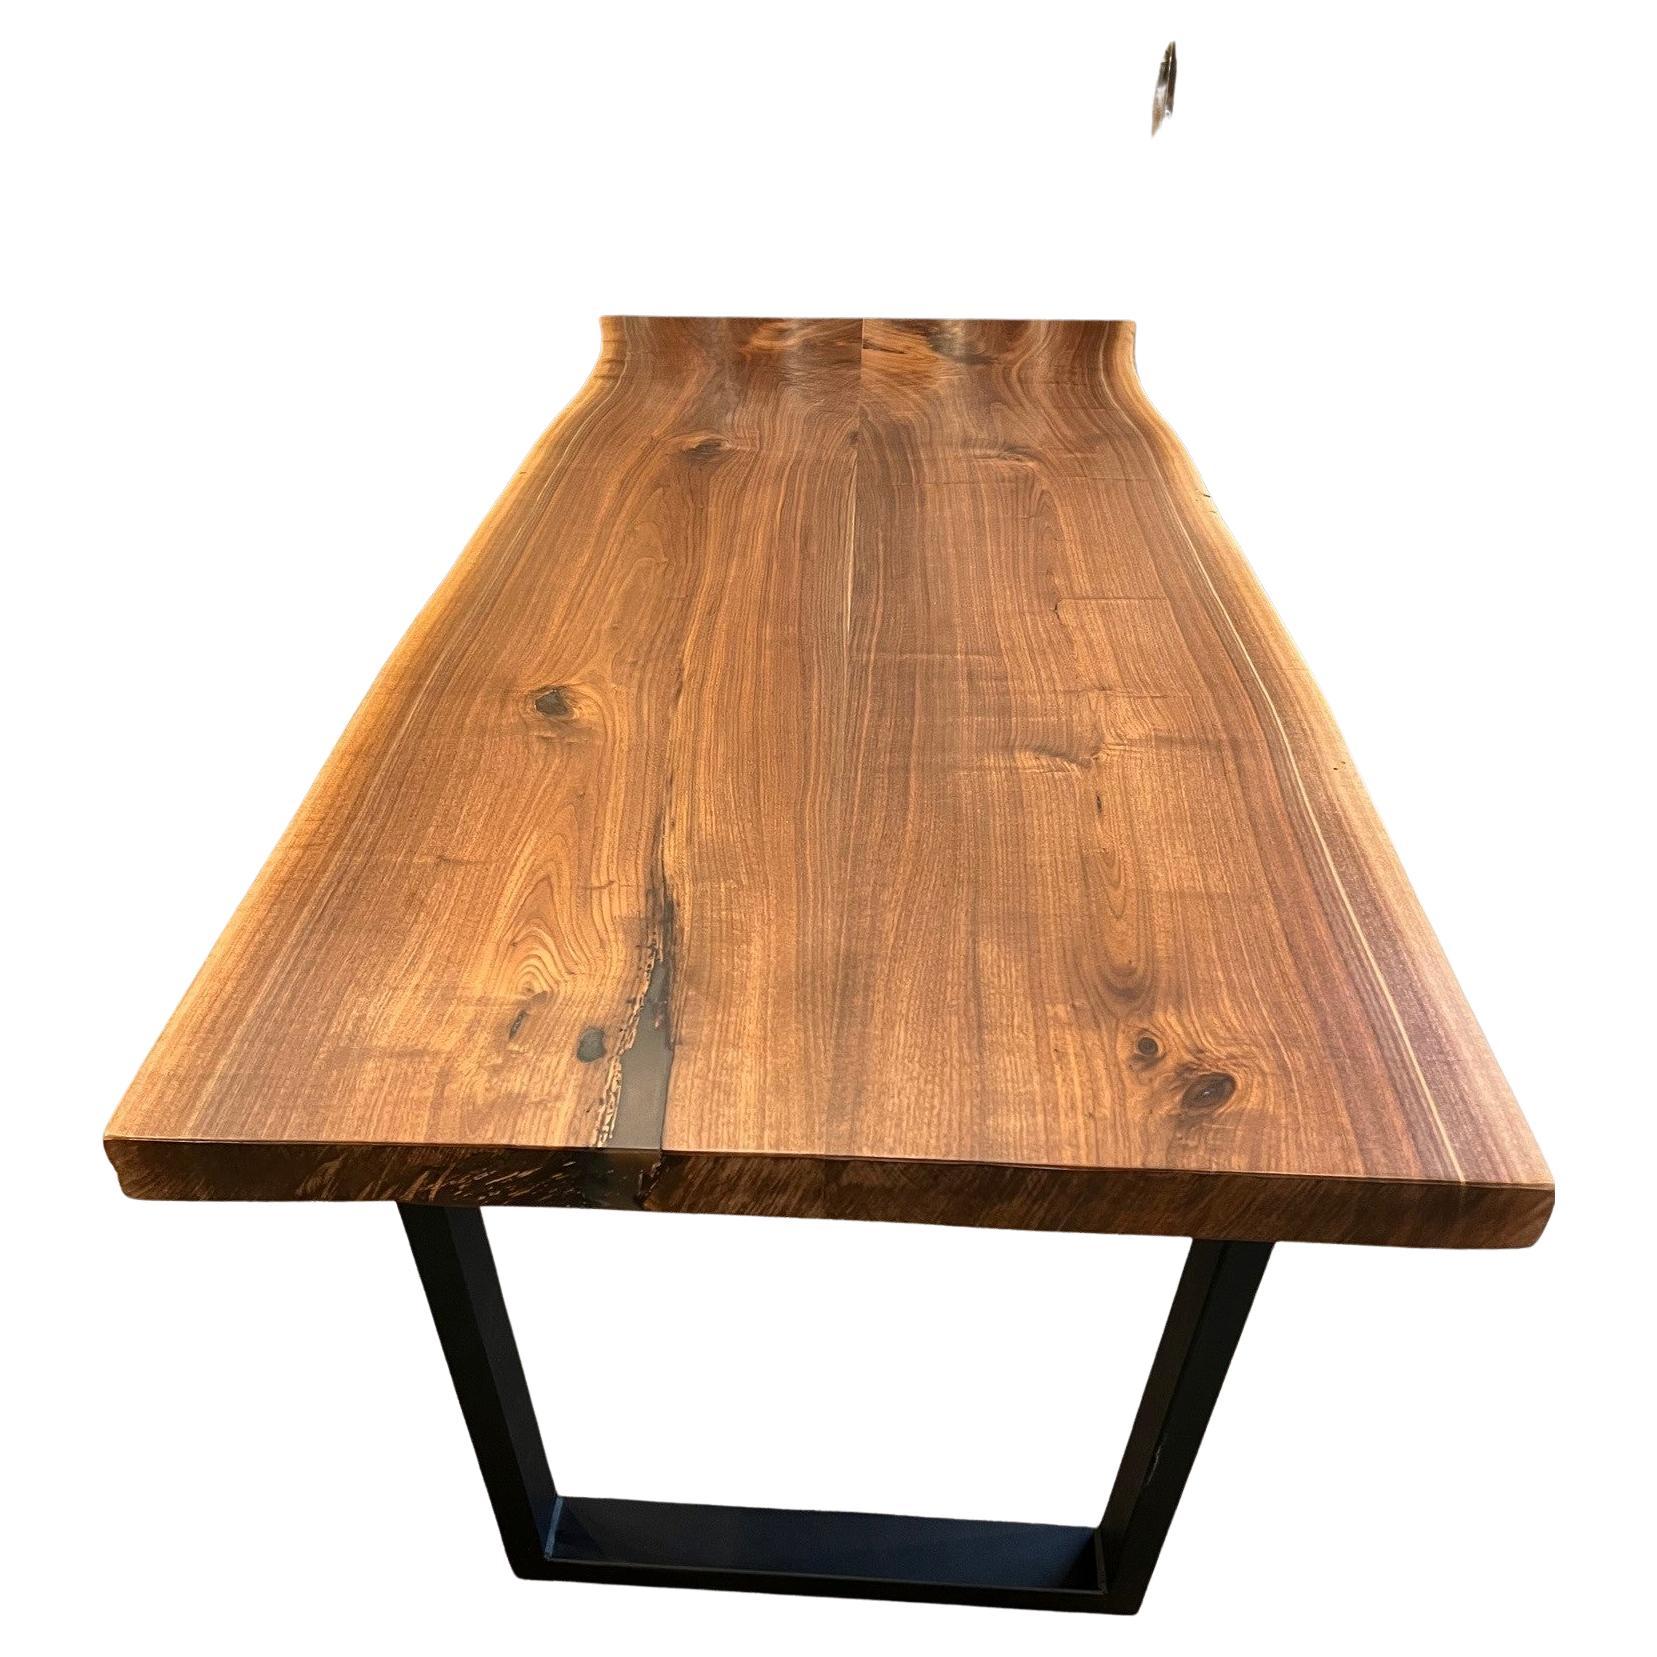  Walnut Live Edge Dining Table with Black Metal Base For Sale